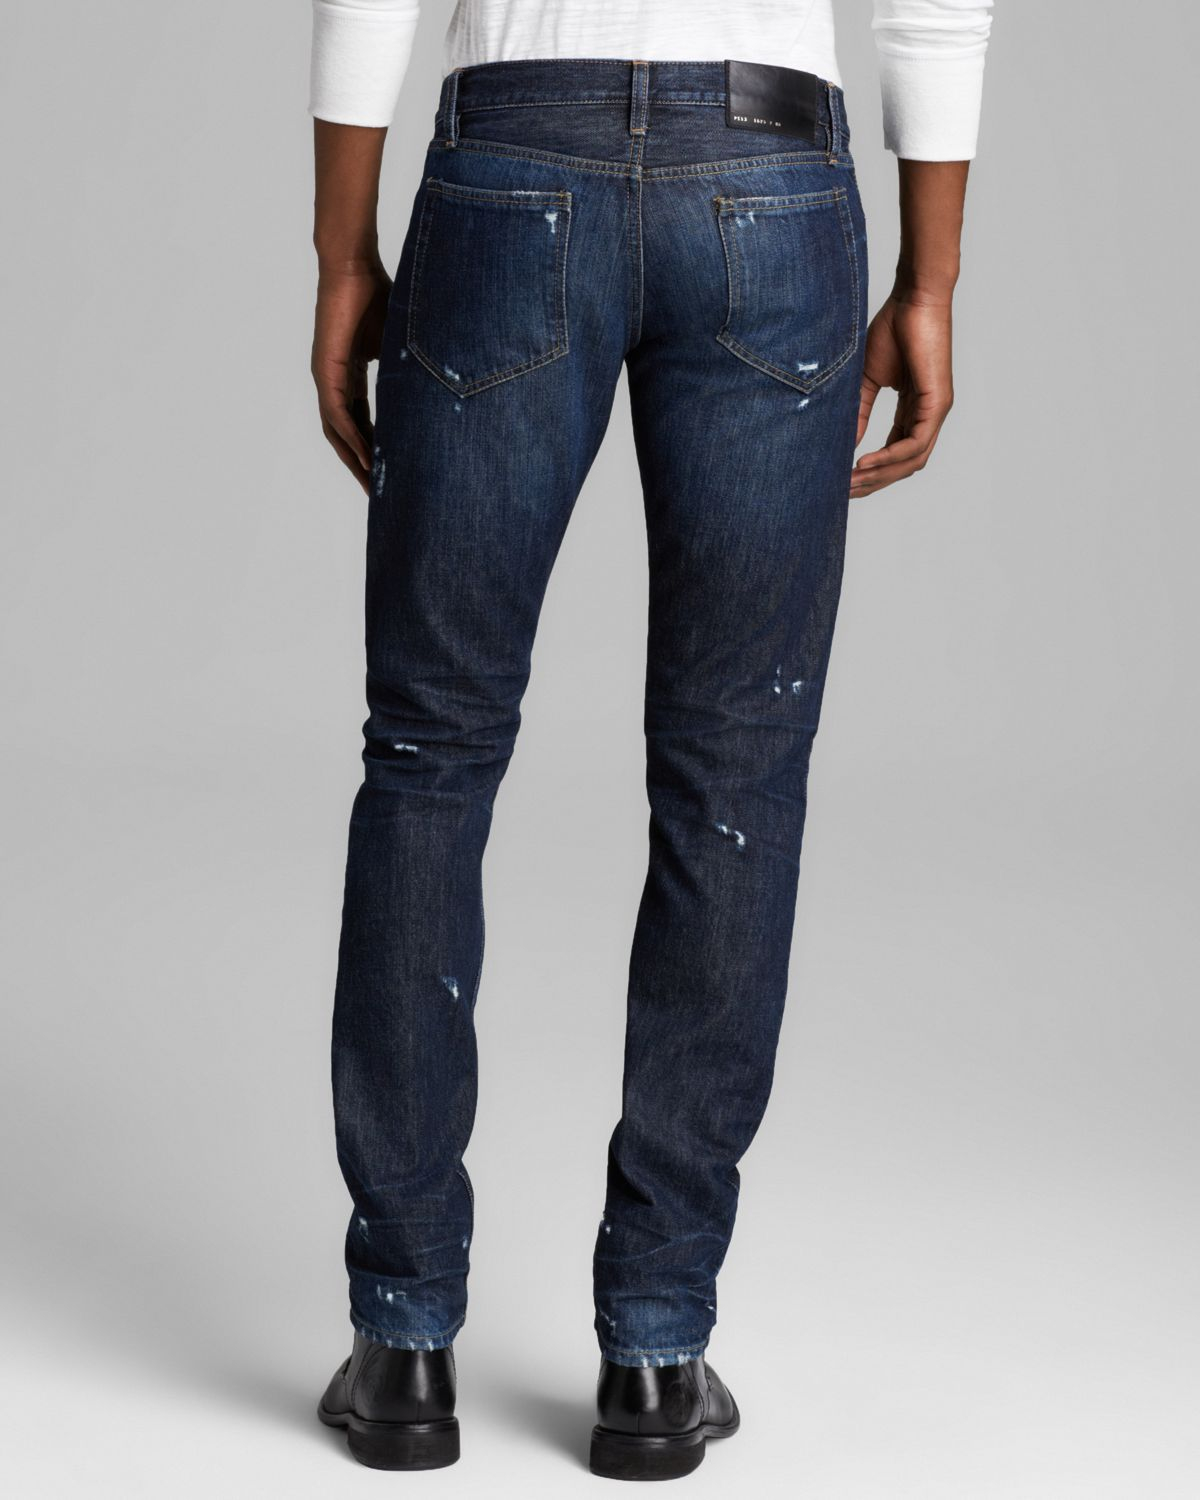 Lyst - Public school Jeans Torn and Patched Slim Fit in Indigo in Blue ...